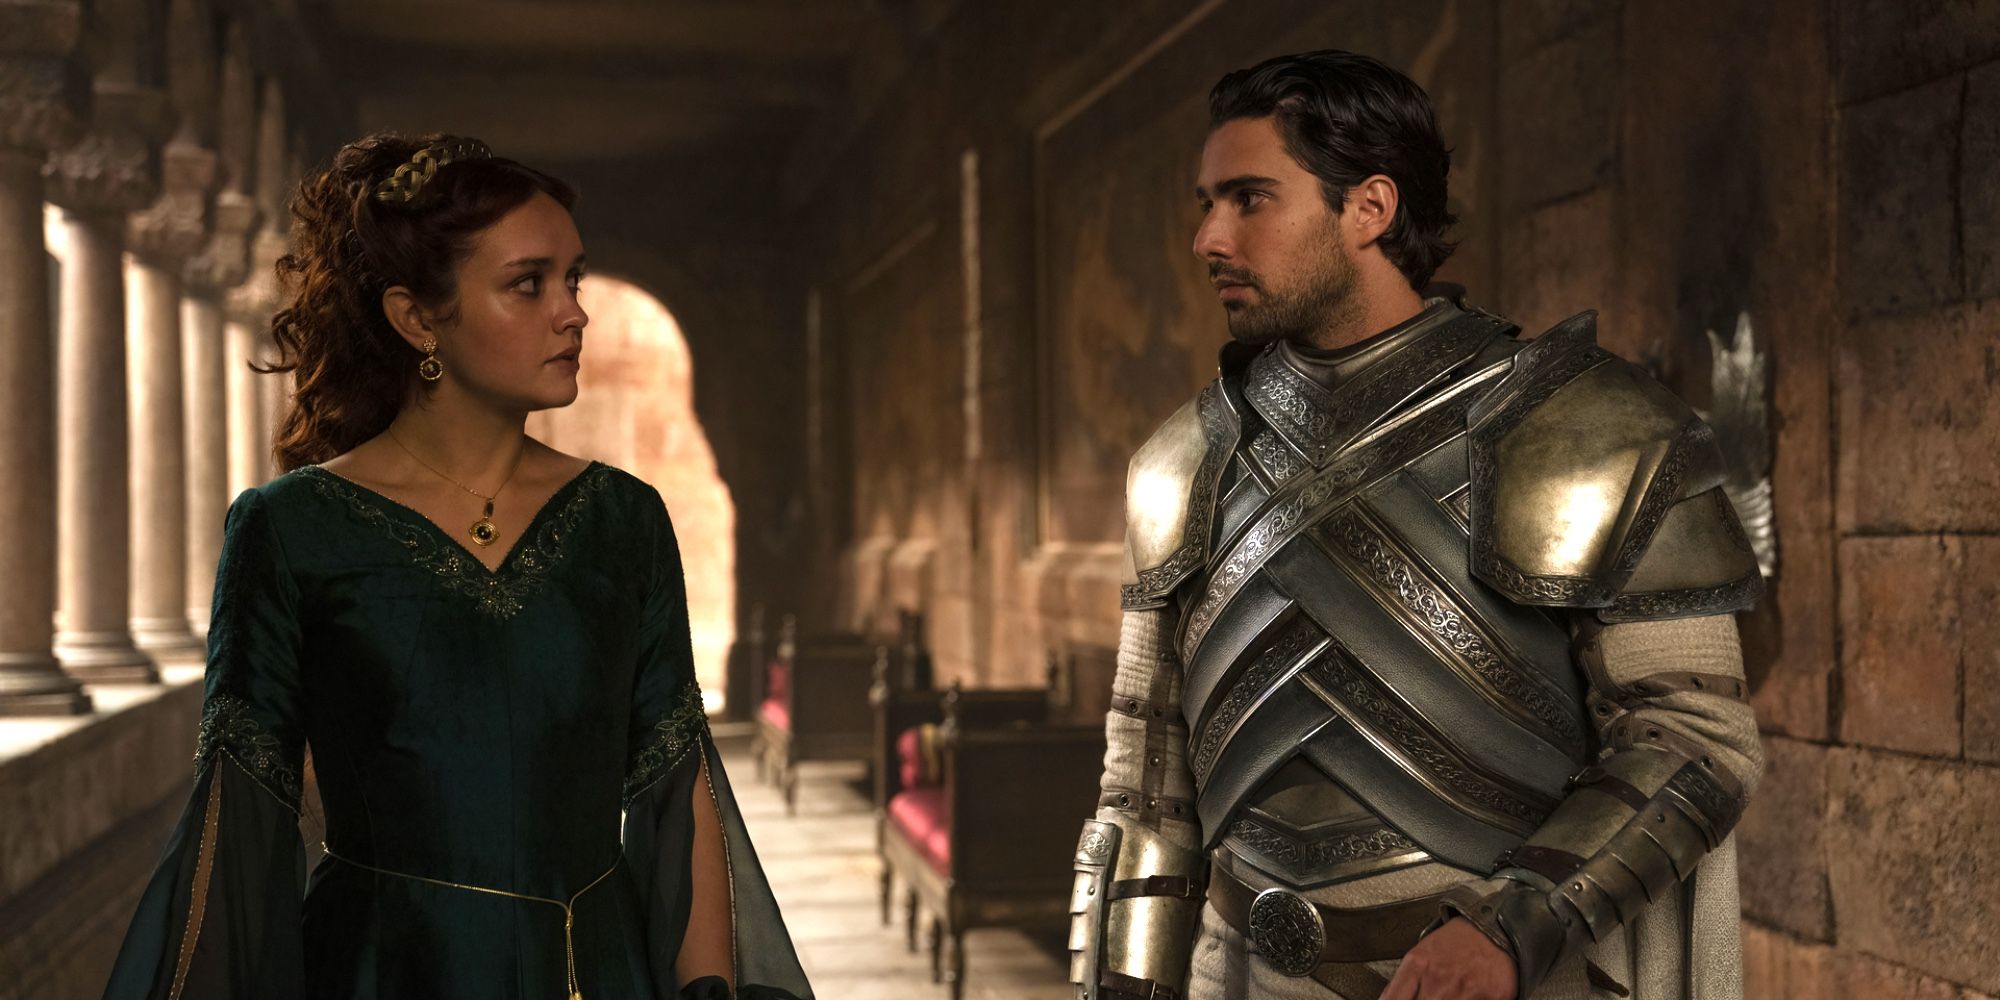 Olivia Cooke as Alicent and Fabien Frankel as Criston in HOTD episode 6